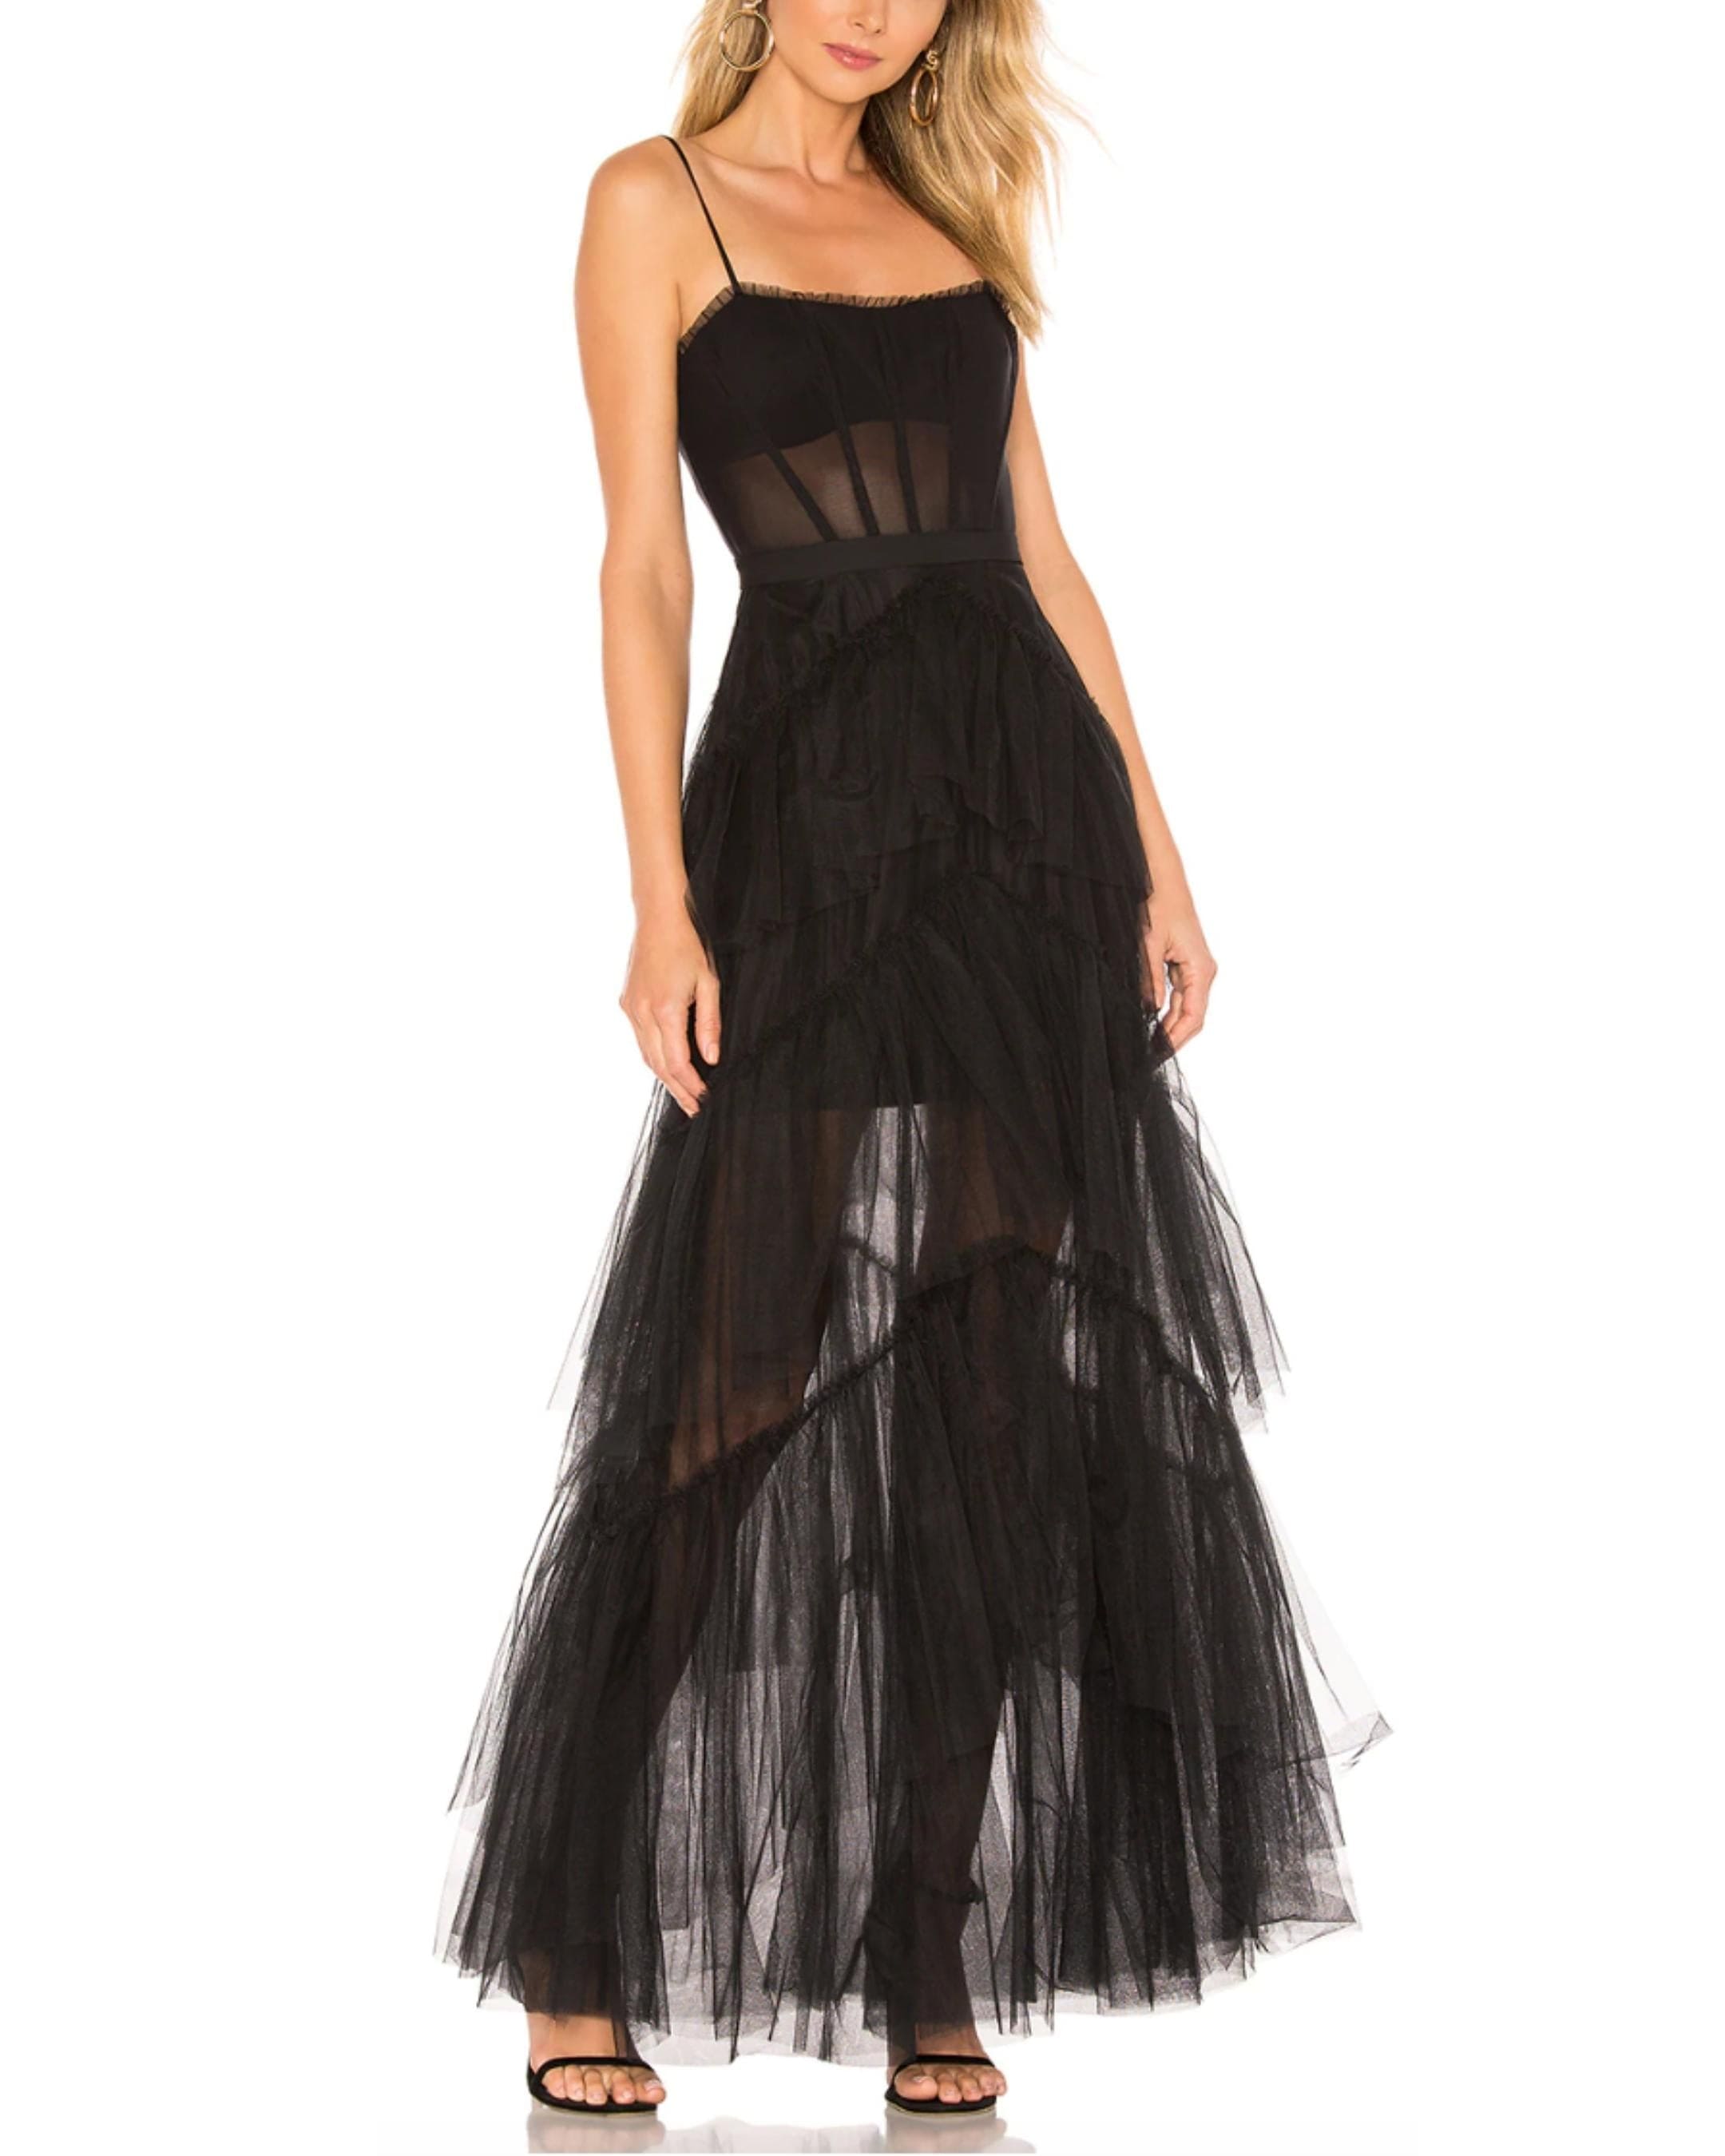 Oly Tiered Ruffle Gown